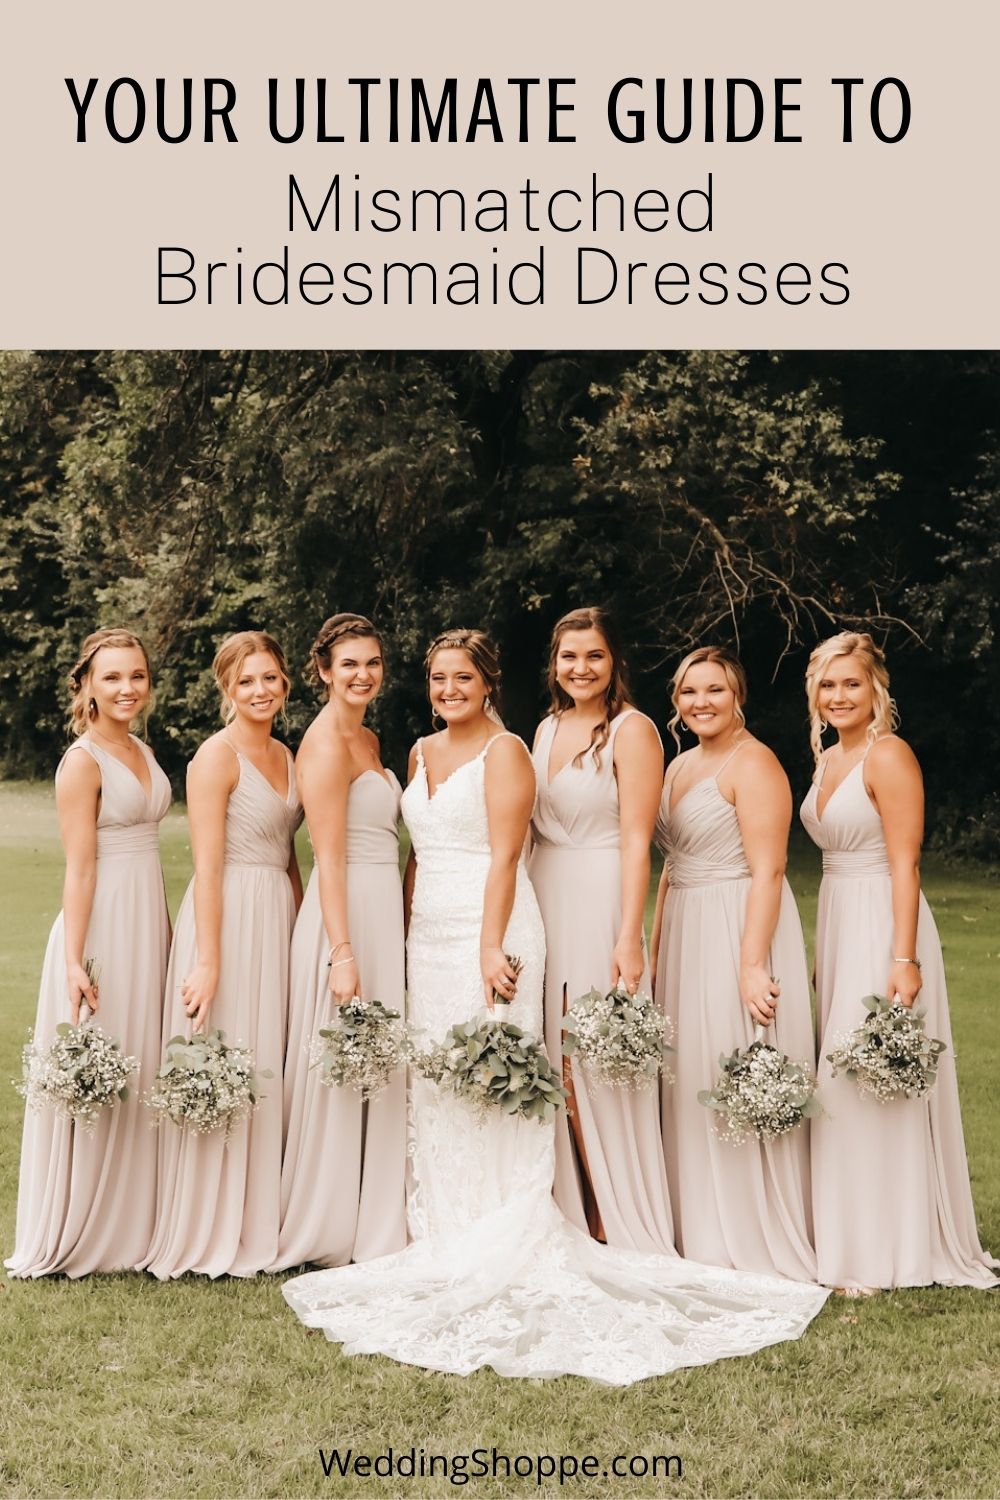 Your Ultimate Guide to Mismatched Bridesmaid Dresses – Wedding Shoppe